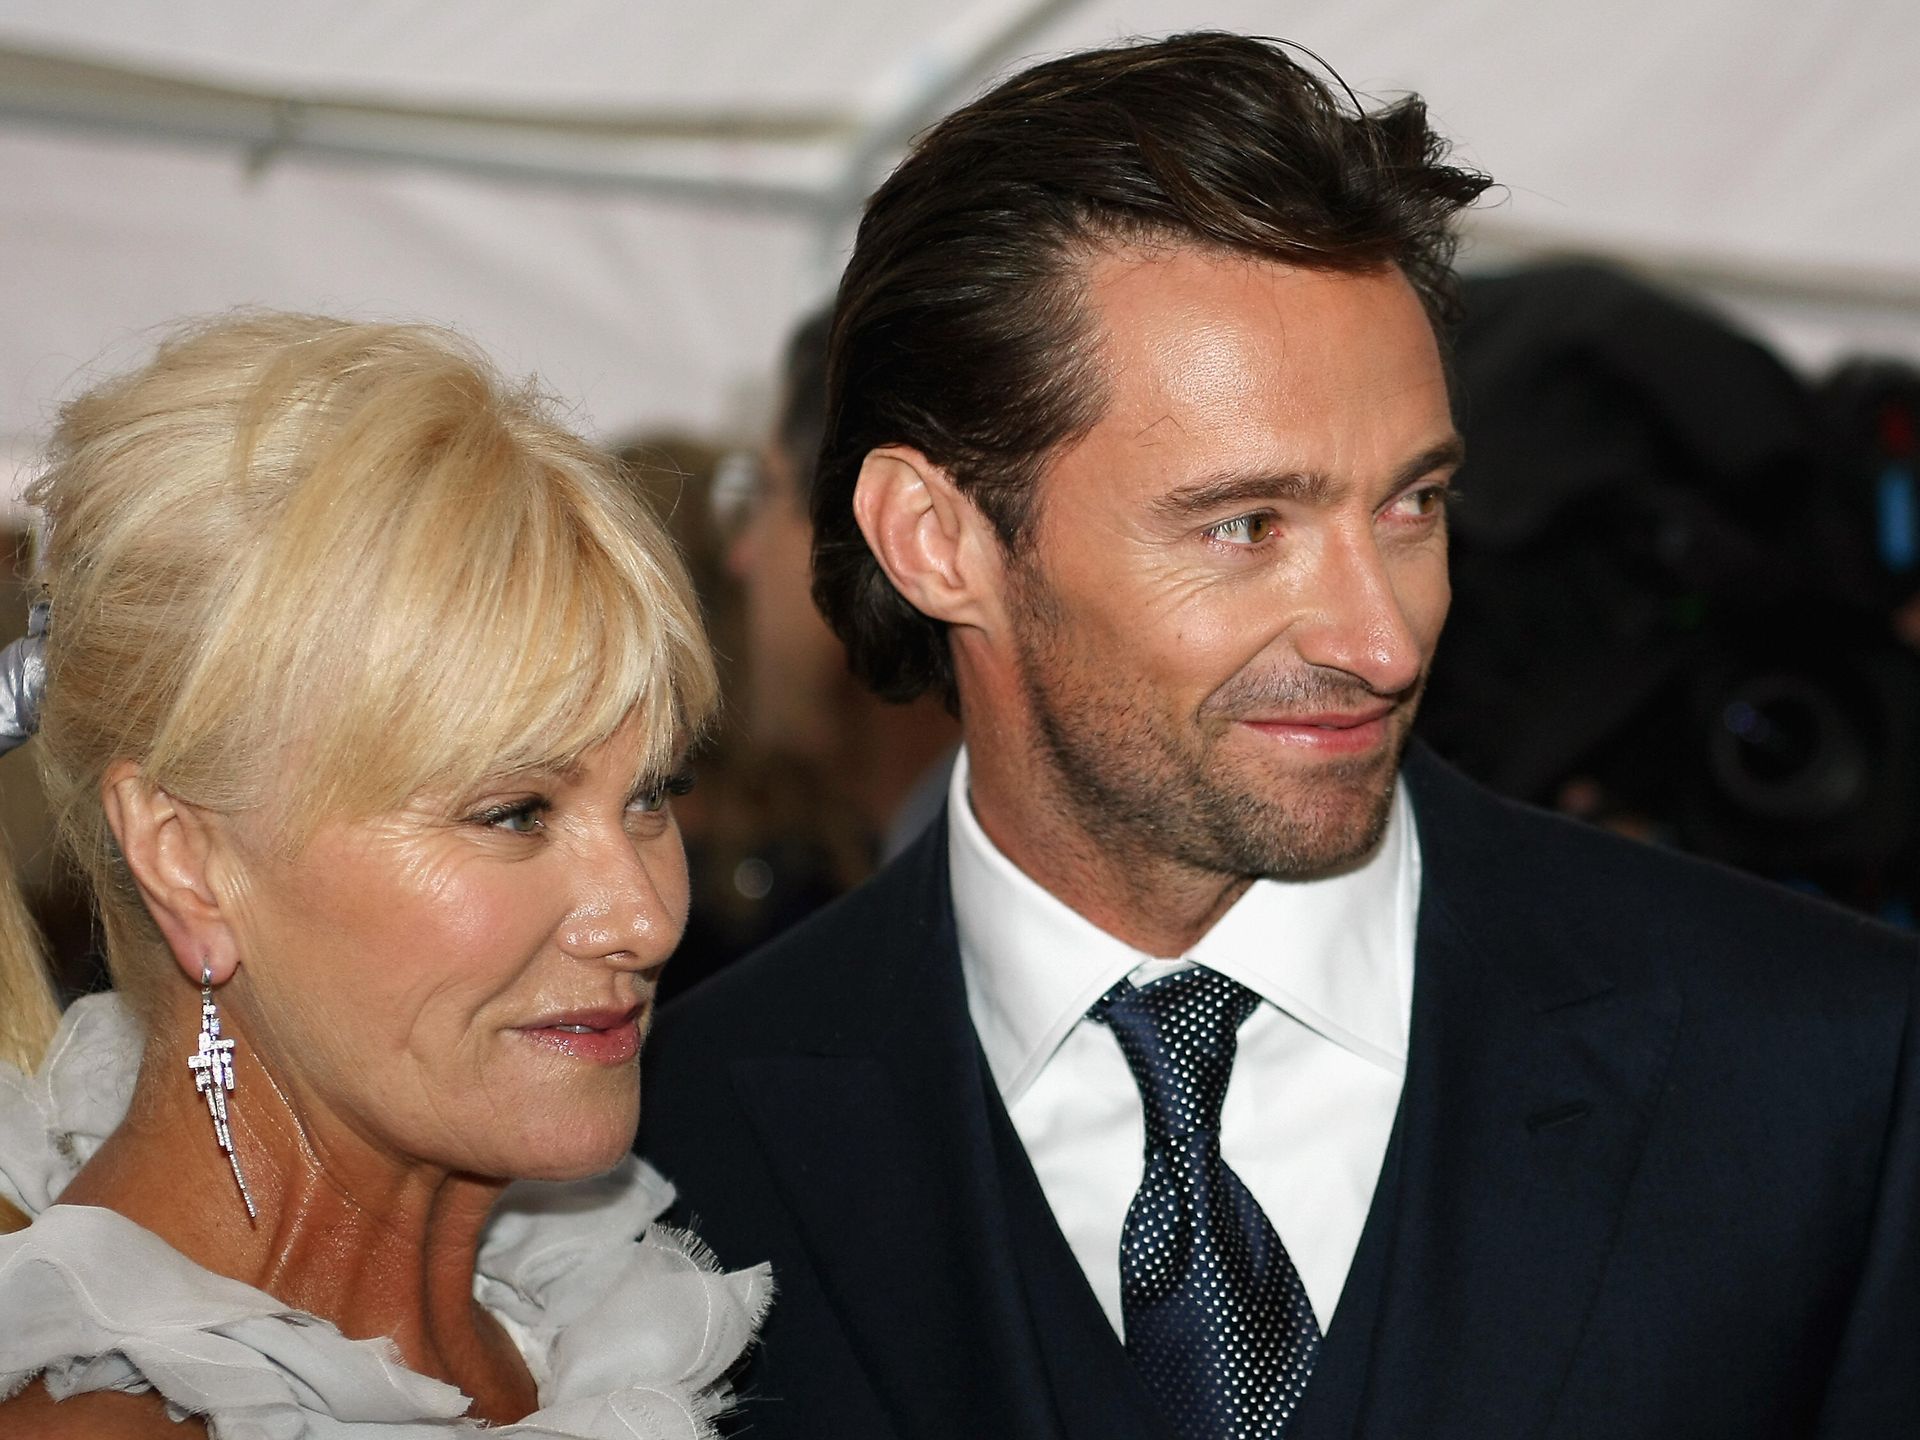 Hugh Jackman spotted without his wedding ring after split from wife |  Celebrity News | Showbiz & TV | Express.co.uk